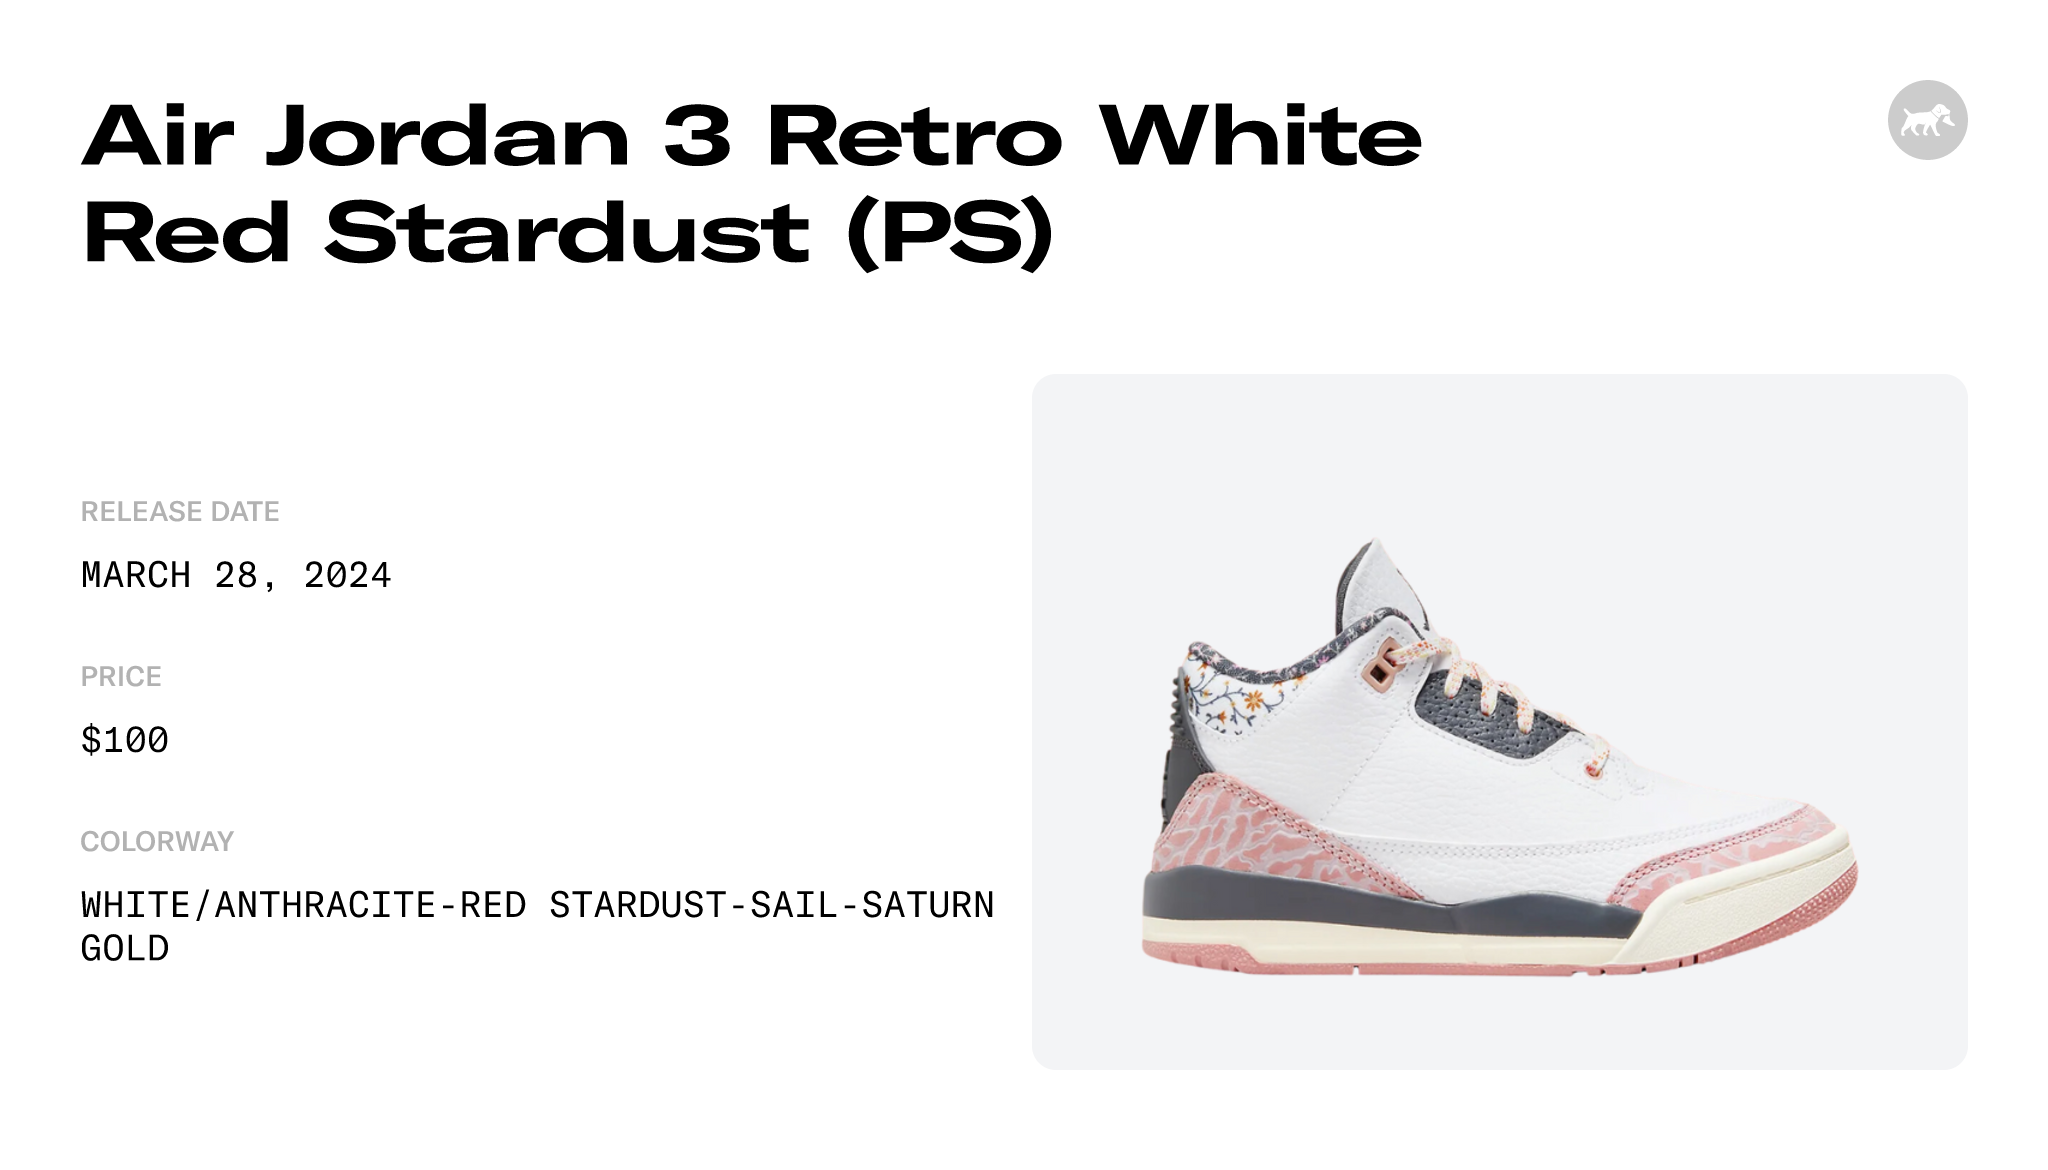 BAIT on X: The Air Jordan 3 GS “Red Stardust” is available now at